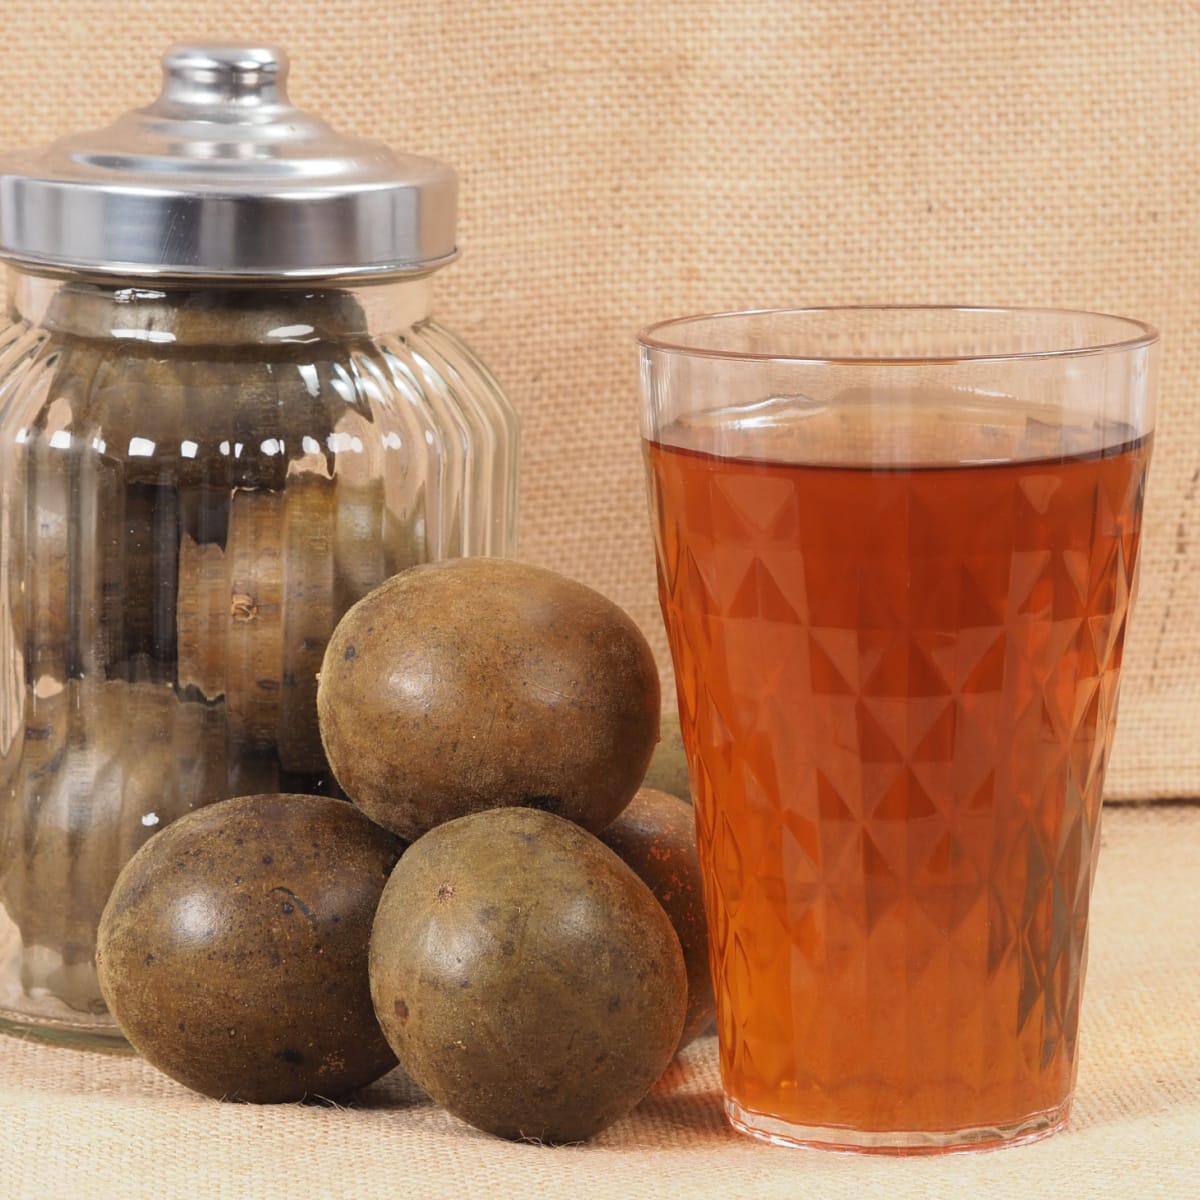 A Jar of Monk Fruit and a Glass of Monk Fruit Syrup